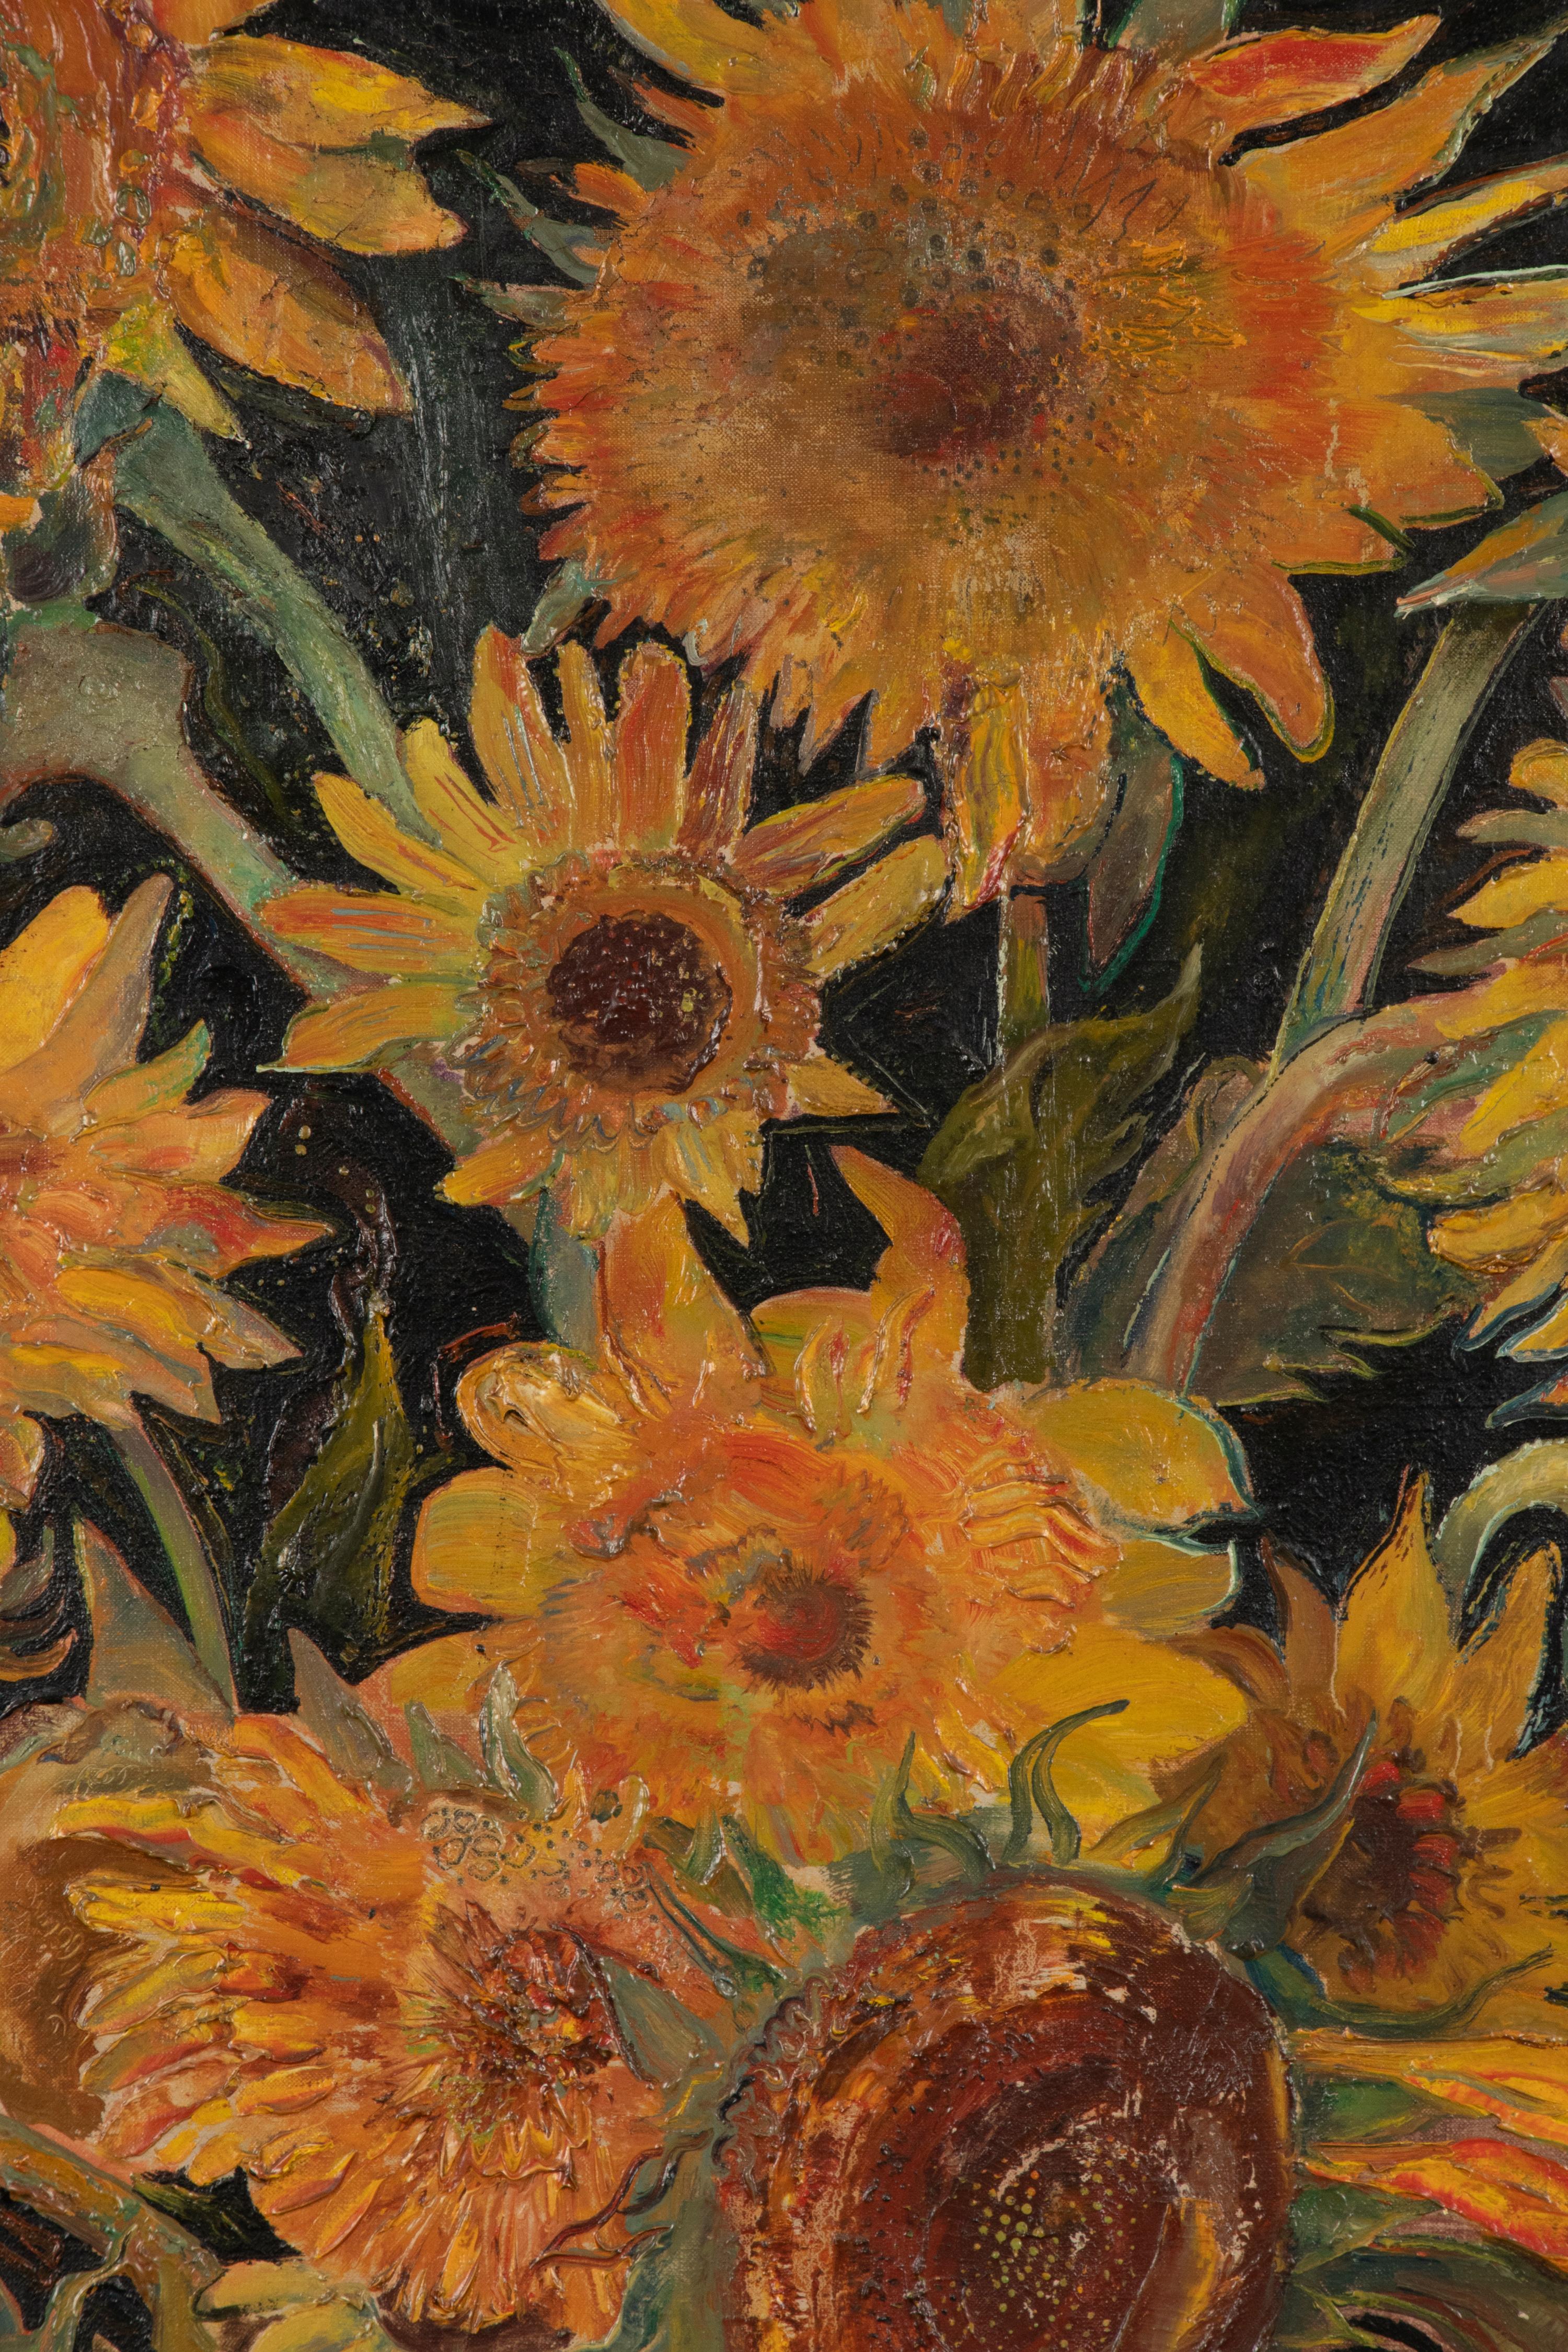 Hand-Painted Mid-20th Century, Oil Painting Flower Still Life with Sunflowers in a Vase For Sale